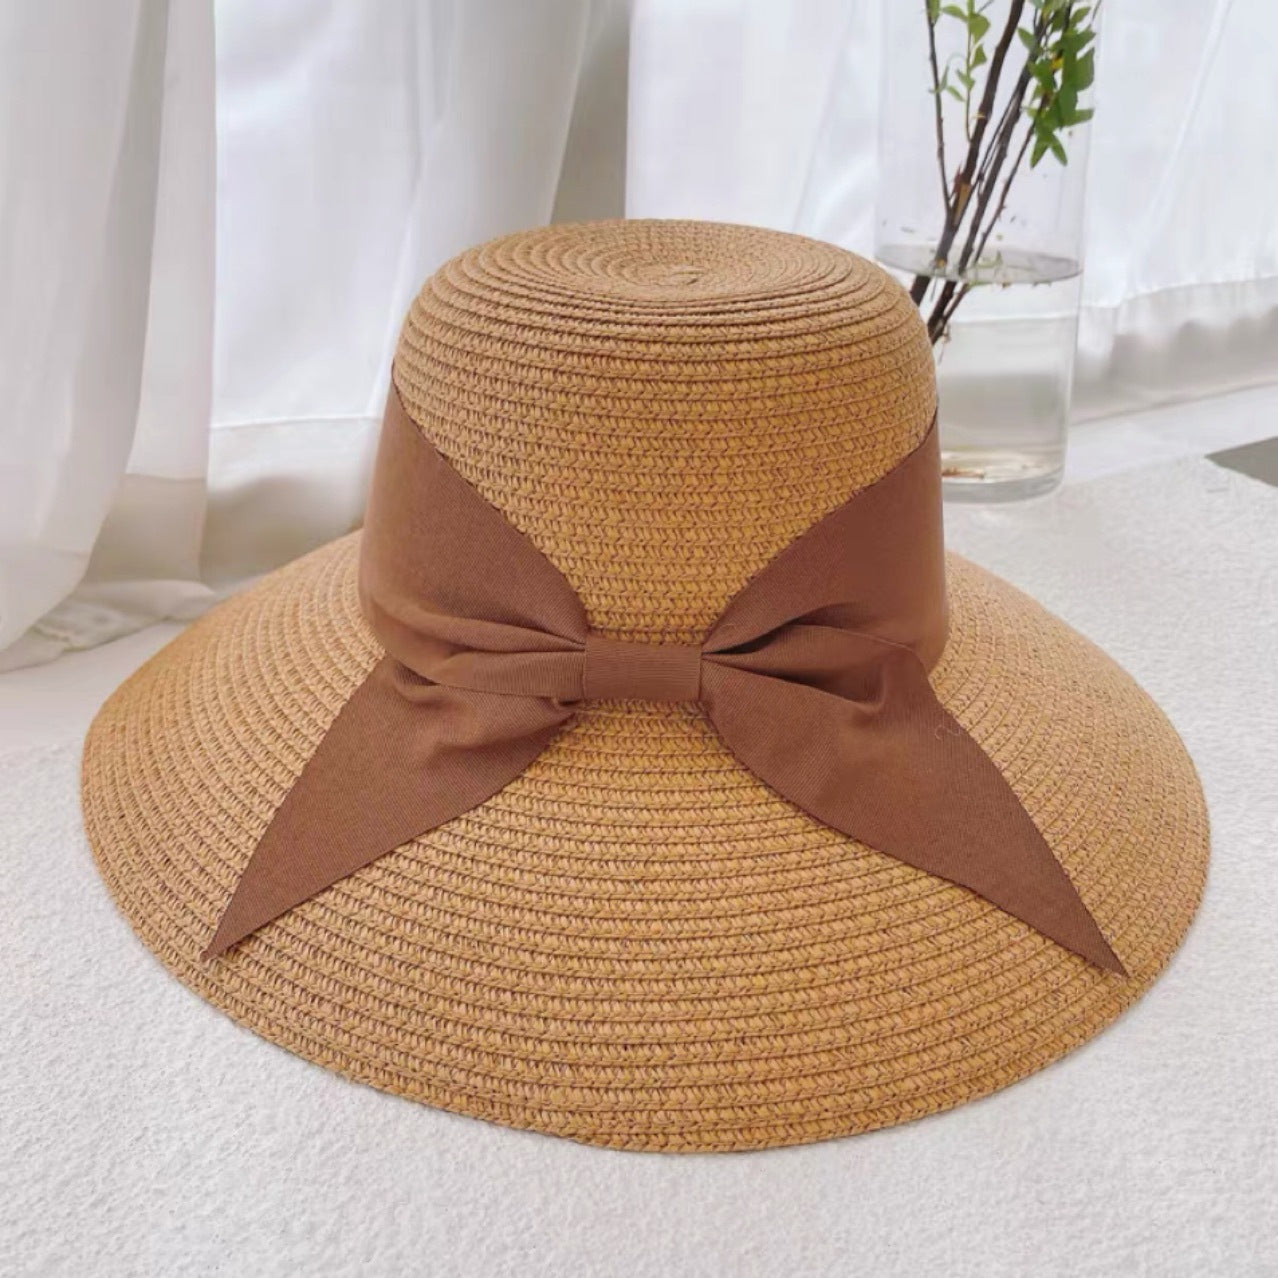 A Straw Hat Foldable Beach Sunshade with a bow on it, perfect for beach days and providing sunshade by Beachy Cover Ups.